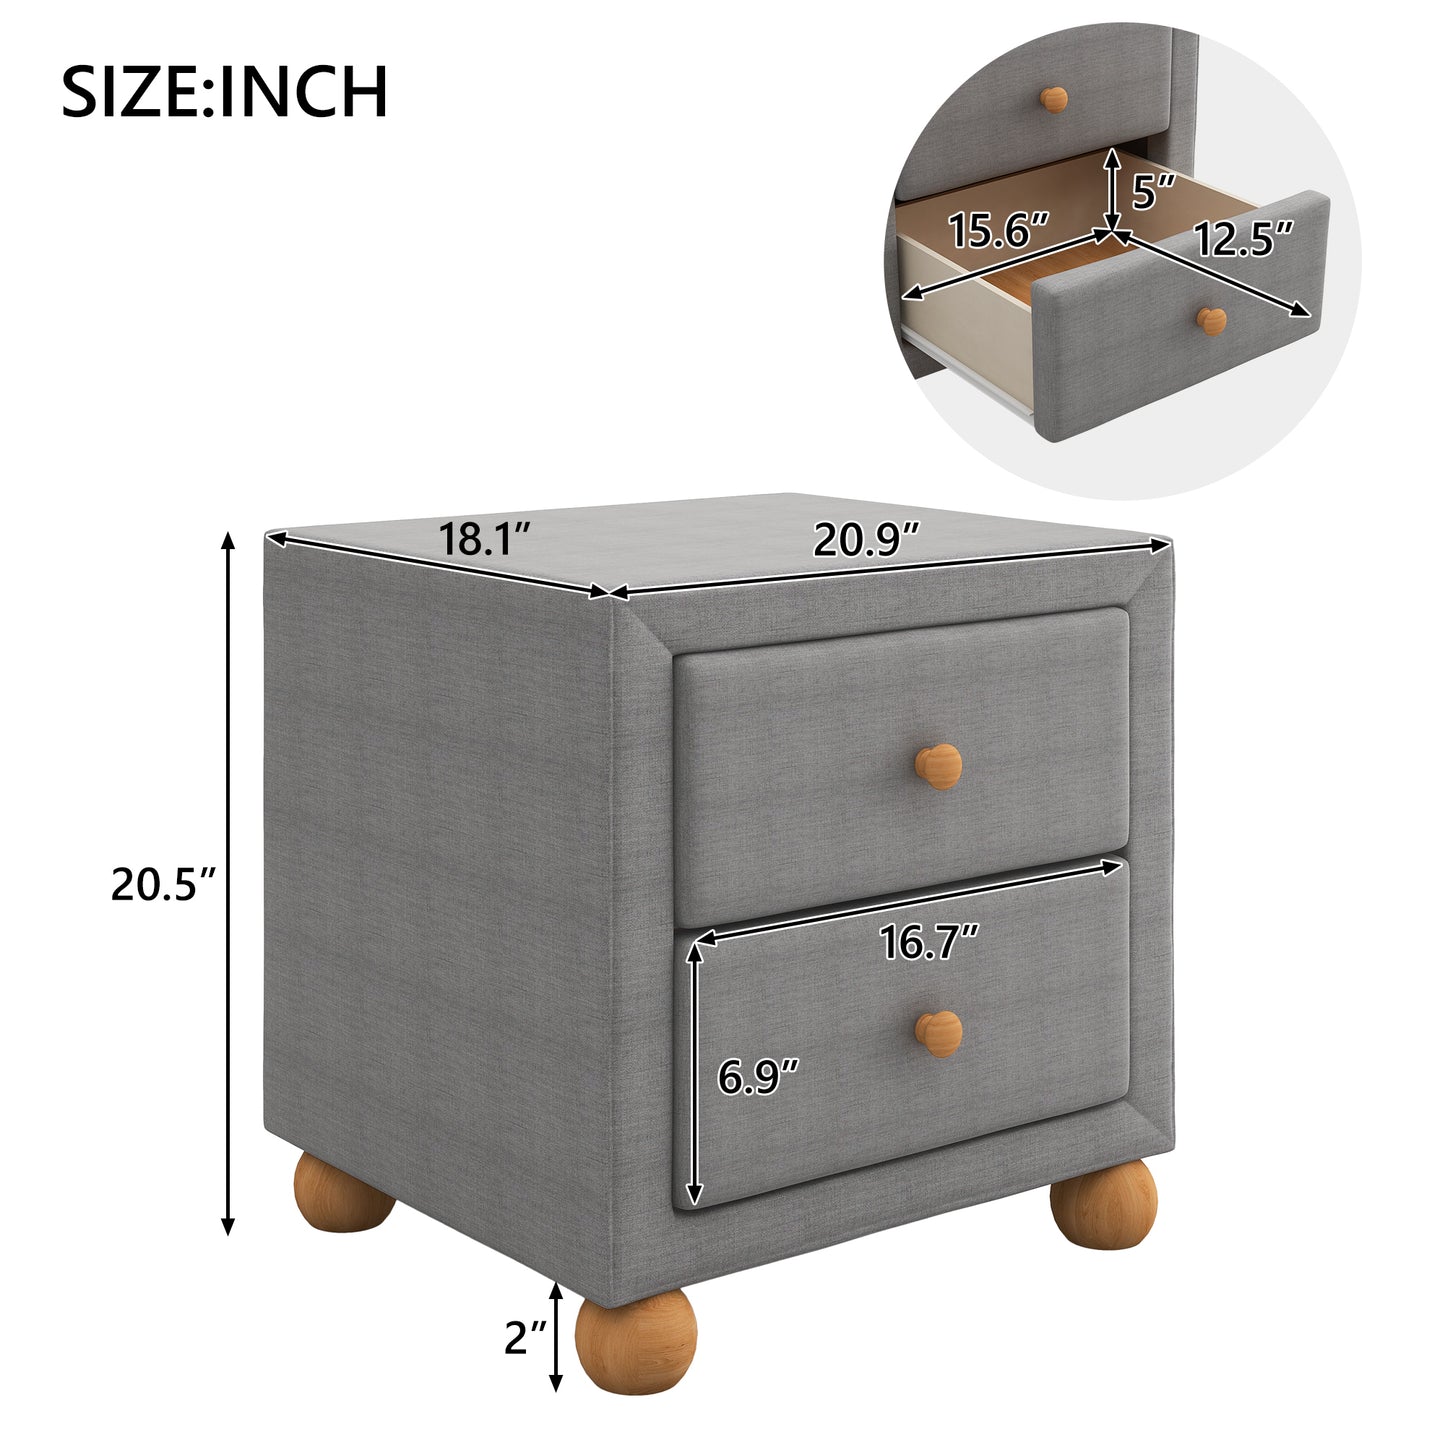 Modern Upholstered Storage Nightstand with 2 Drawers,Natural Wood Knobs,Dark Gray